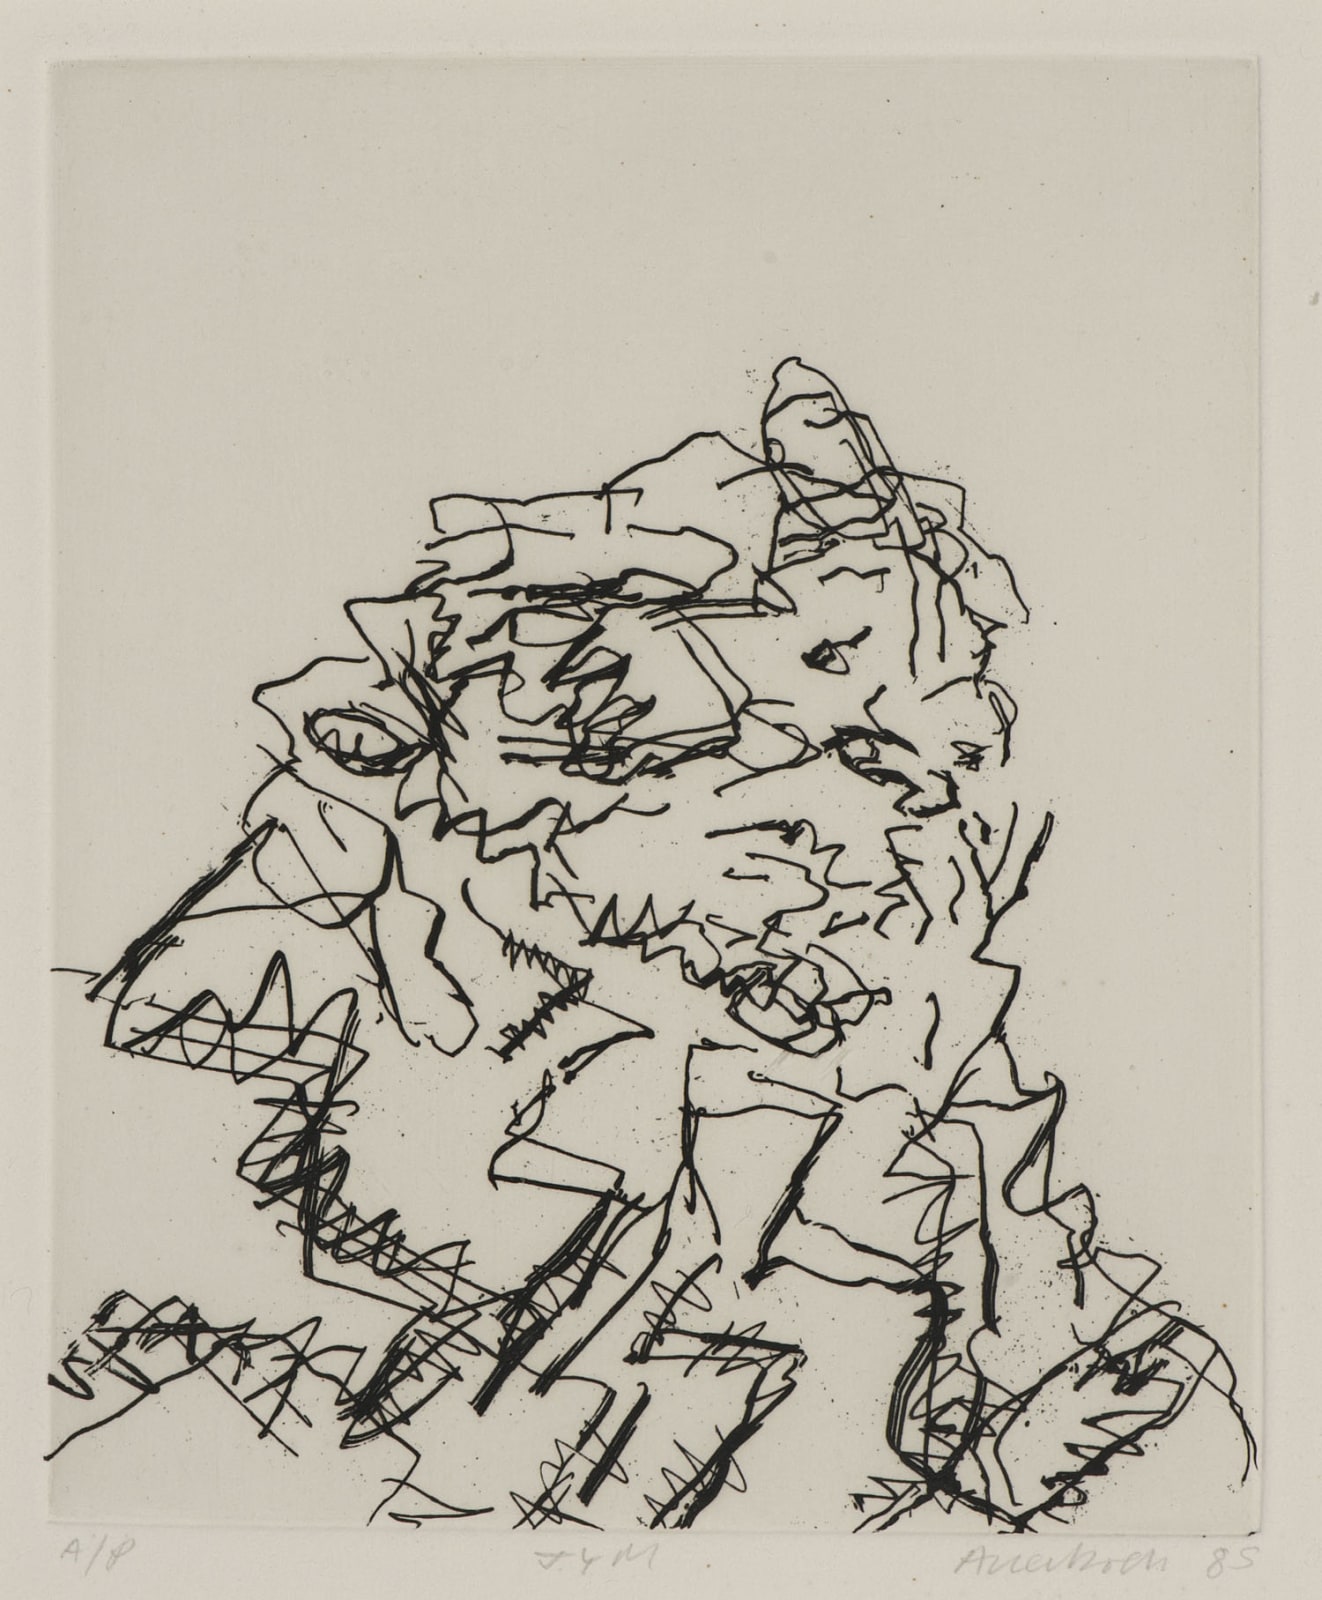 Frank Auerbach (1931-) J.Y.M., Series: Part of Seven Portraits 1989 Etching, printed on Somerset white paper, artist's proof outside the published edition of 50 20 x 16.5 cm Ben Uri Collection © Frank Auerbach, courtesy Marlborough Fine Art